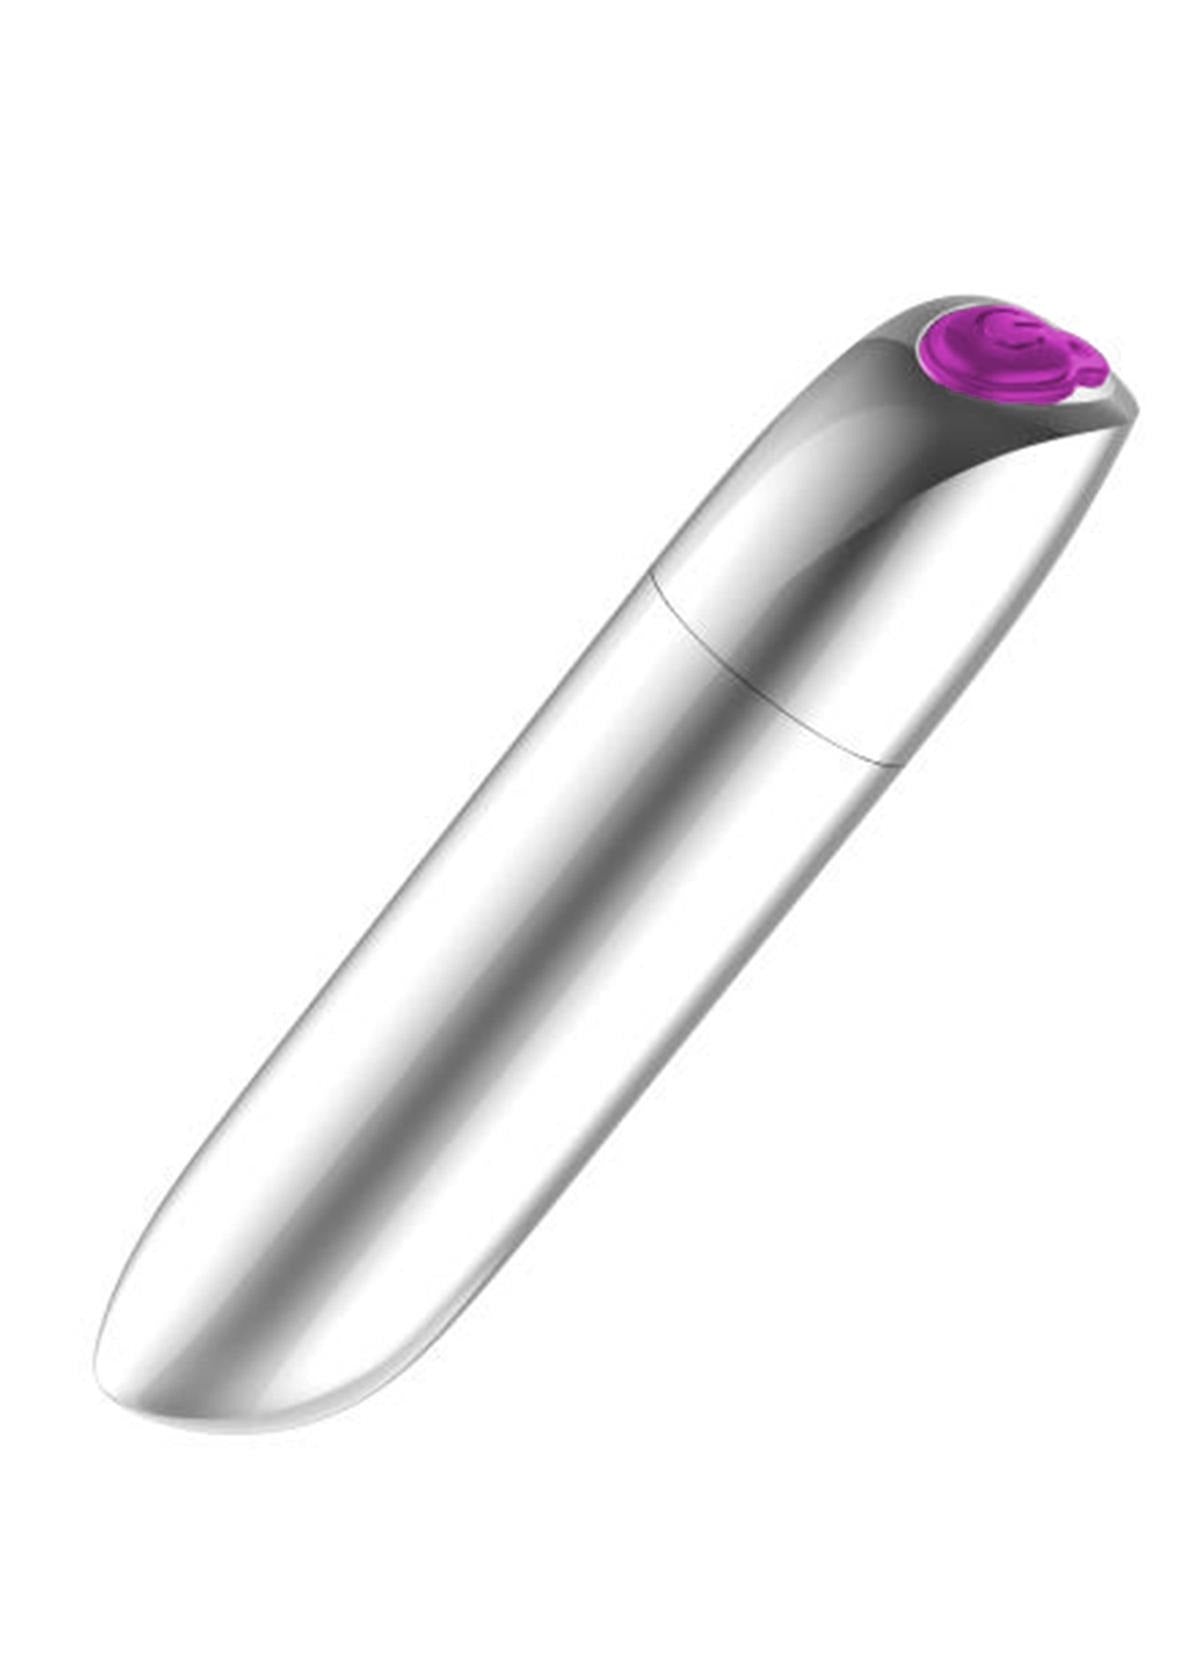 Bossoftoys - 22-00047 - Powerful Bullet Vibrator - USB rechargeable - 20 Functions - Silver